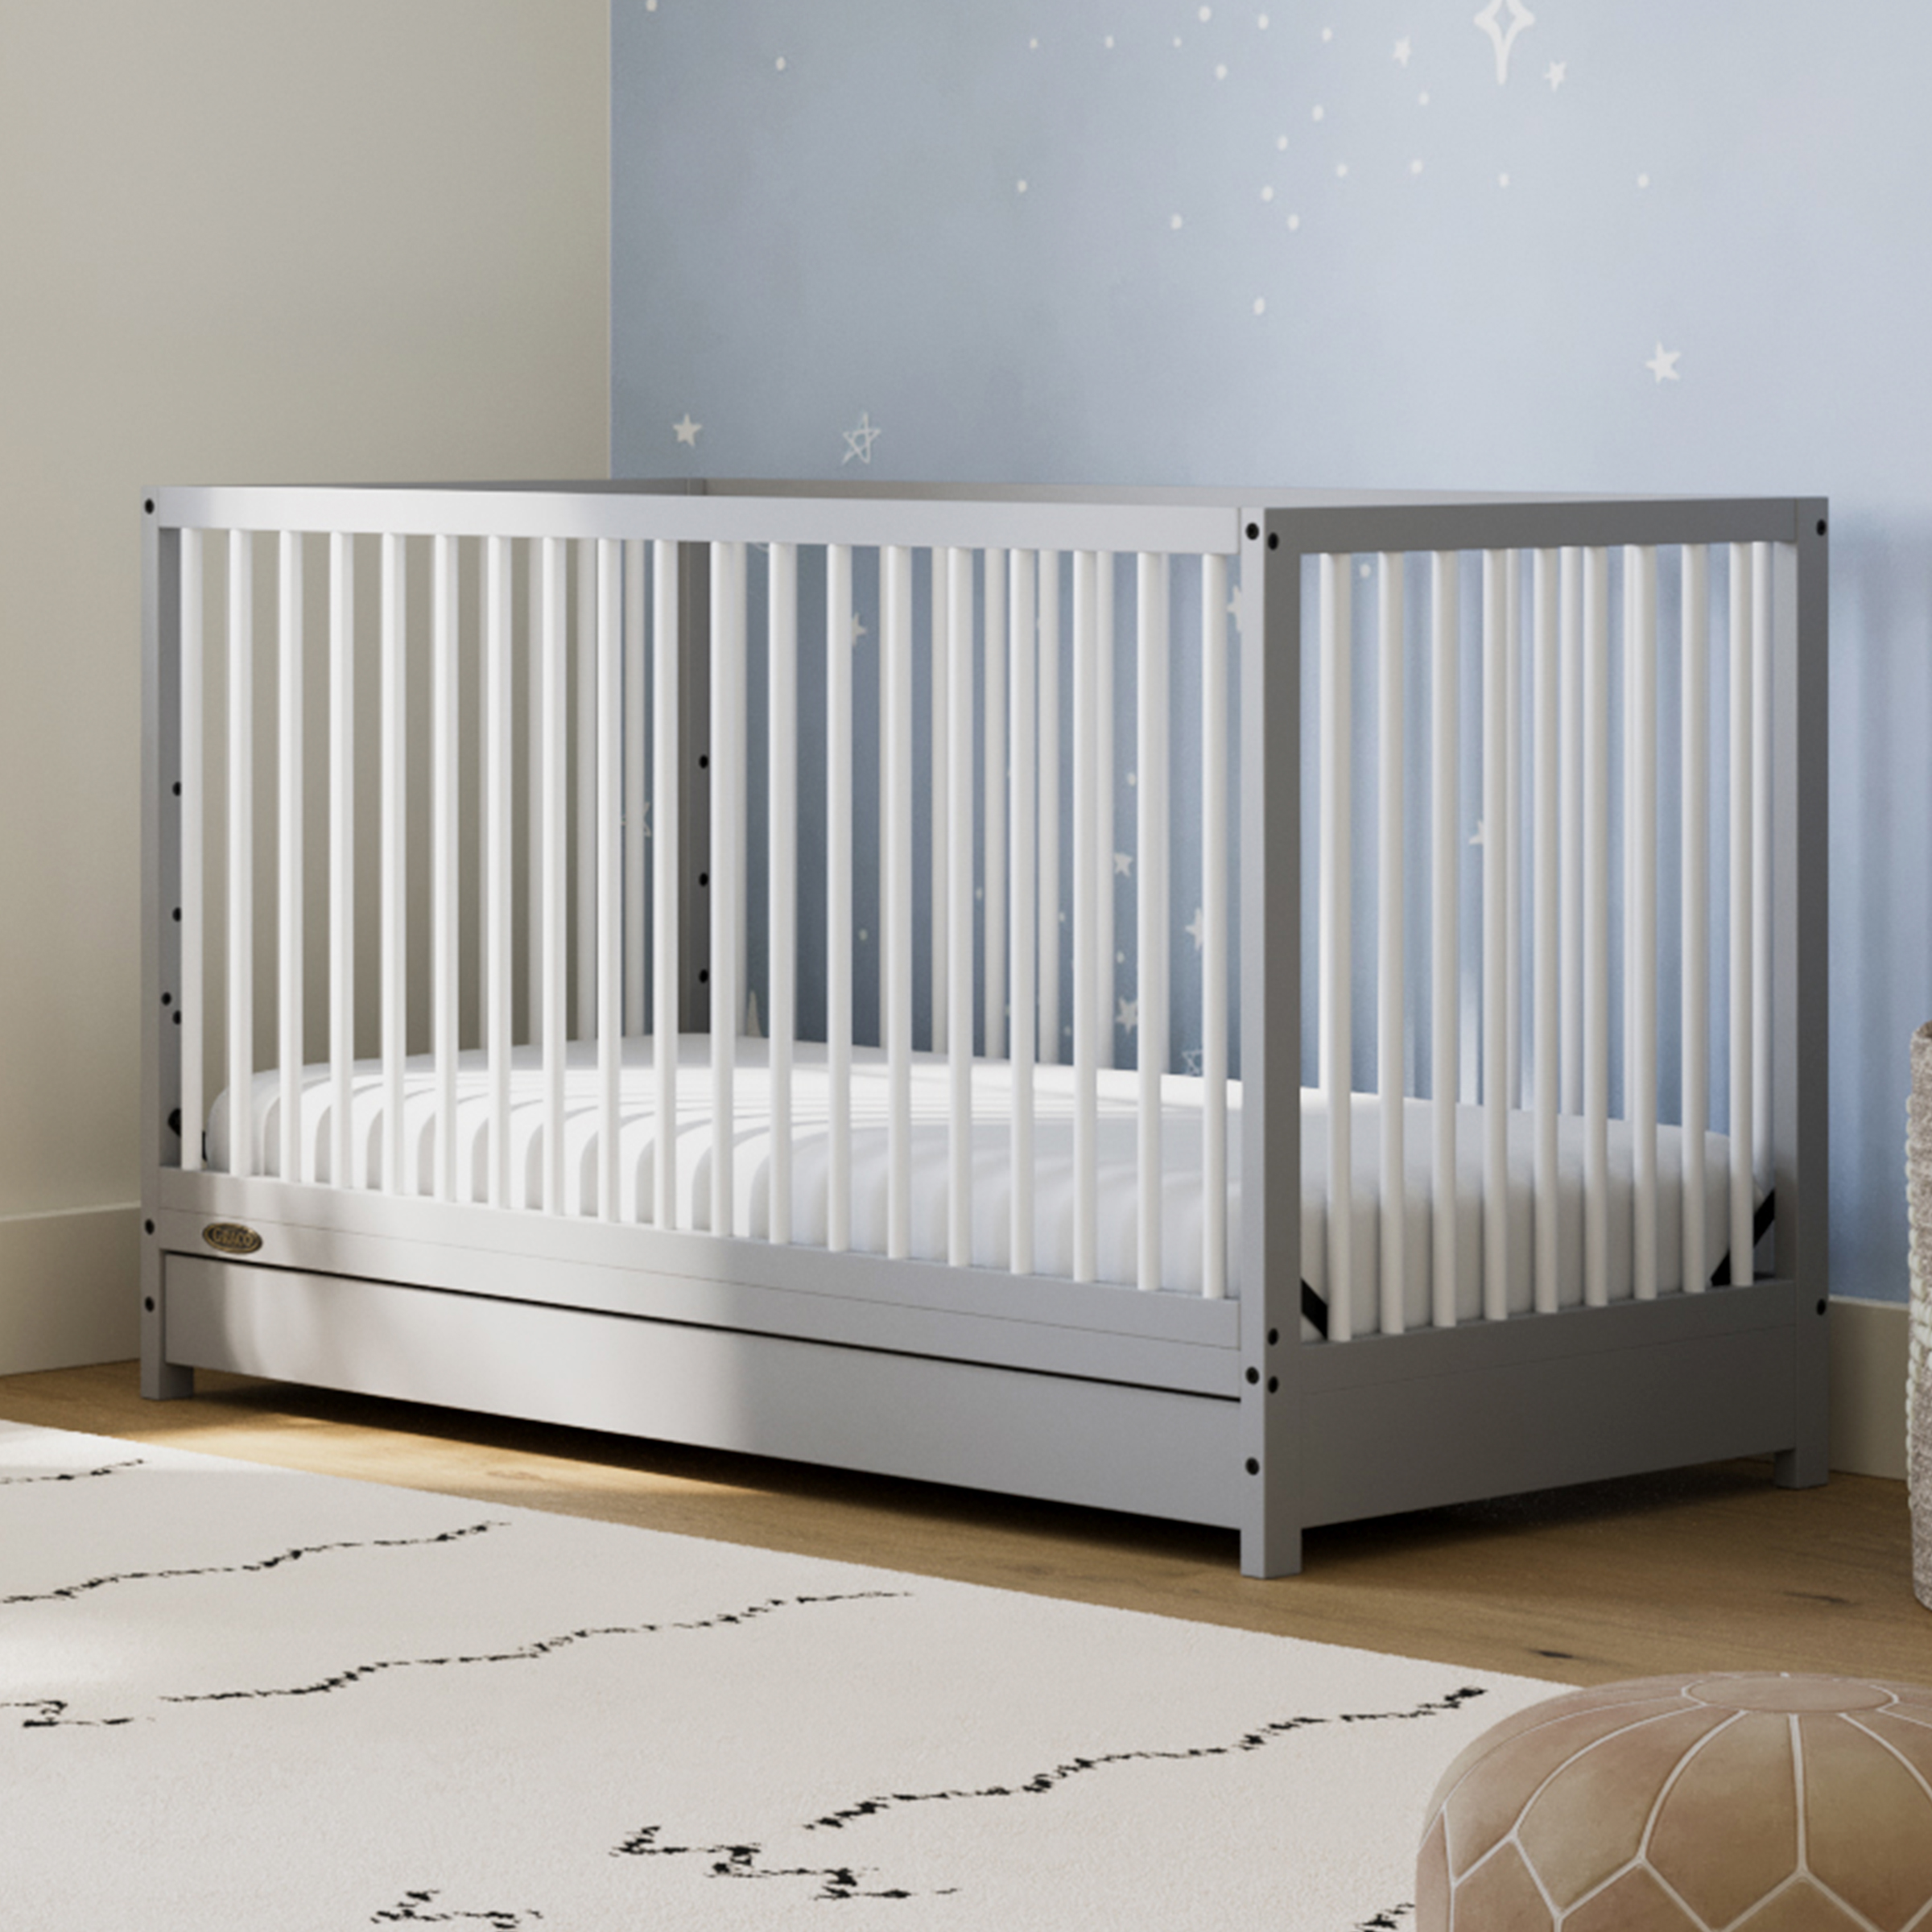 Graco Teddi 5-in-1 Convertible Baby Crib with Drawer, Pebble Gray and White - image 2 of 14